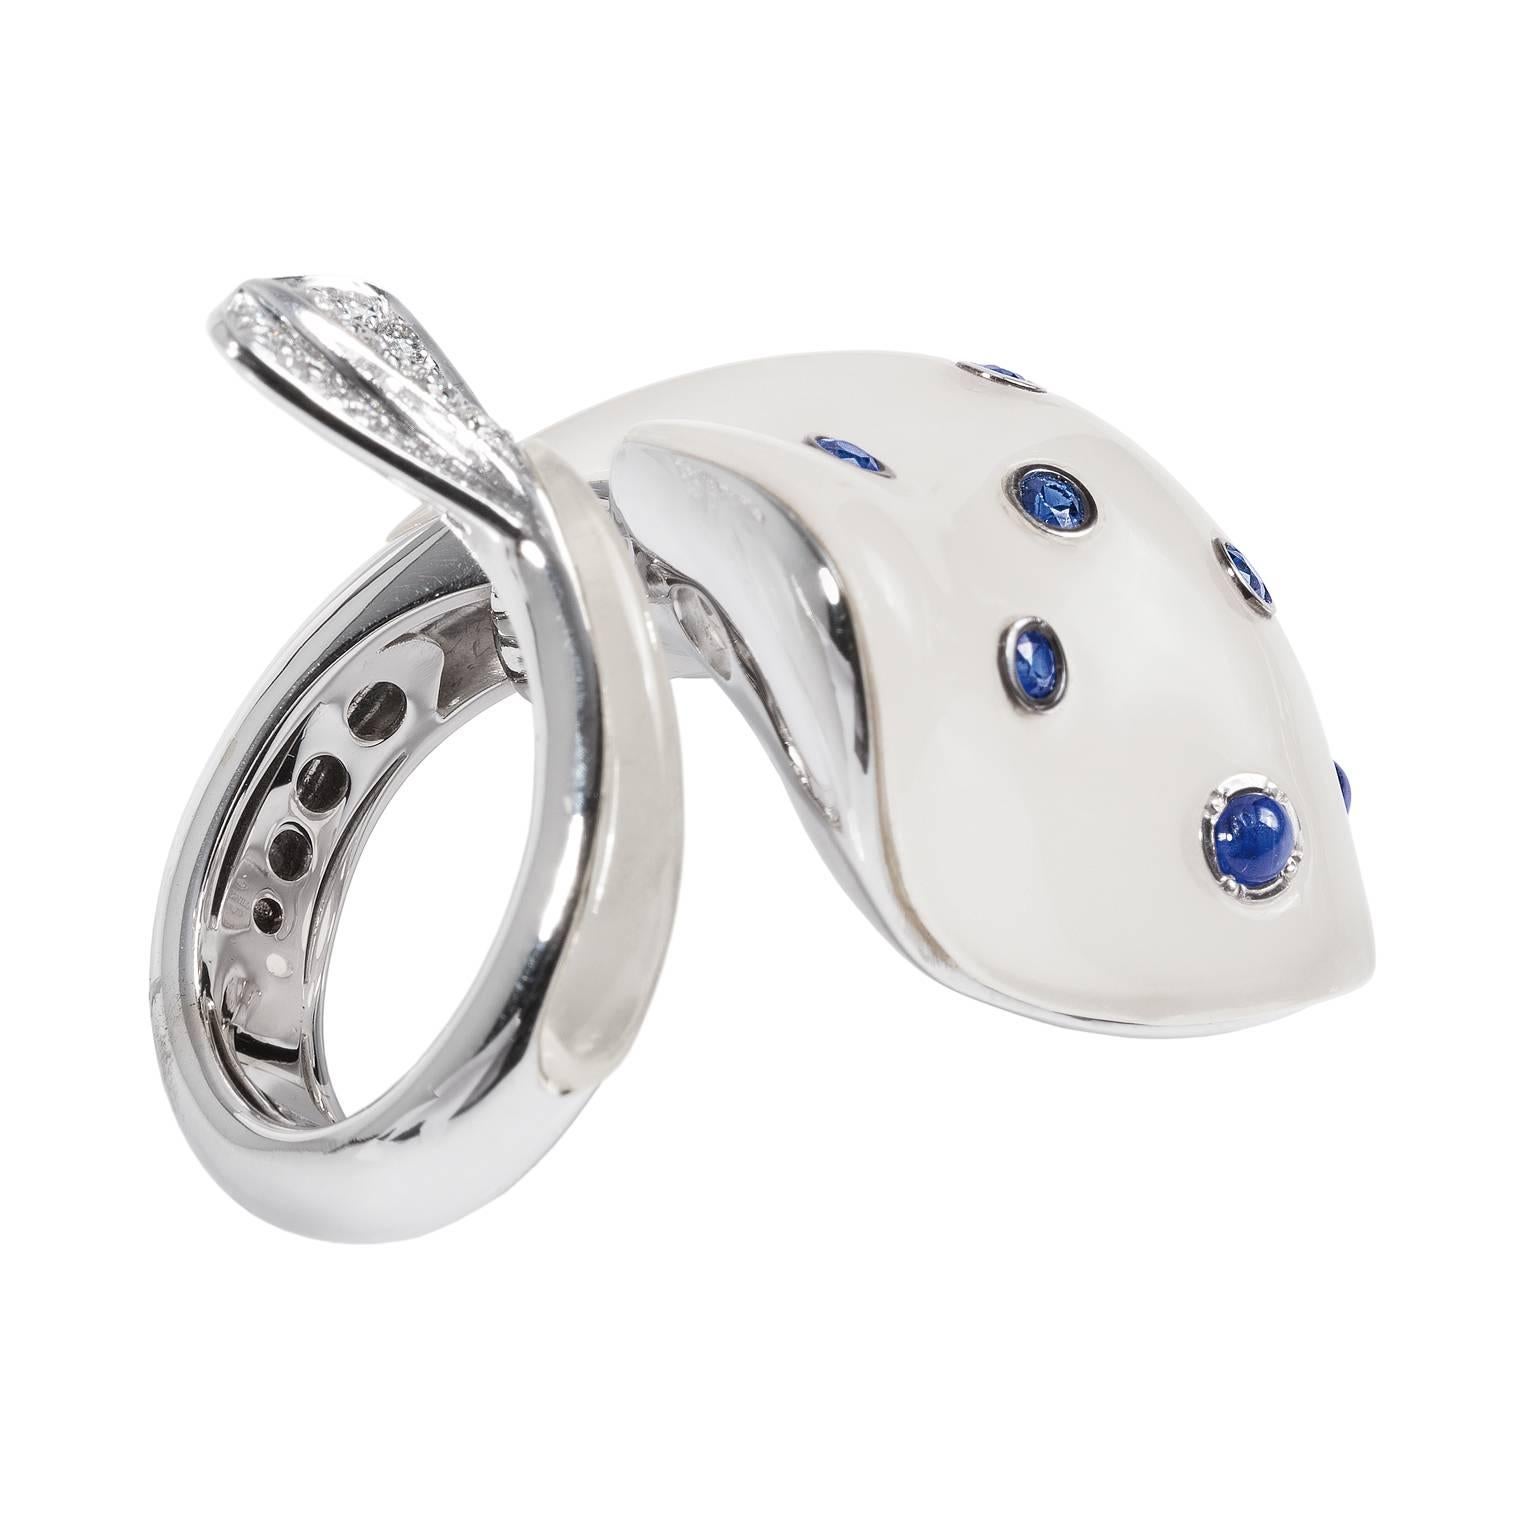 Ray Fish White Diamond Blue Sapphire Milky Quartz 18Kt Gold Ring Made in Italy
A Ray fish ring roll on the finger with a milky effect made by the quartz hand cut. There are 10 sapphires in a collet setting ( two cabochon and eight brilliant cut) in